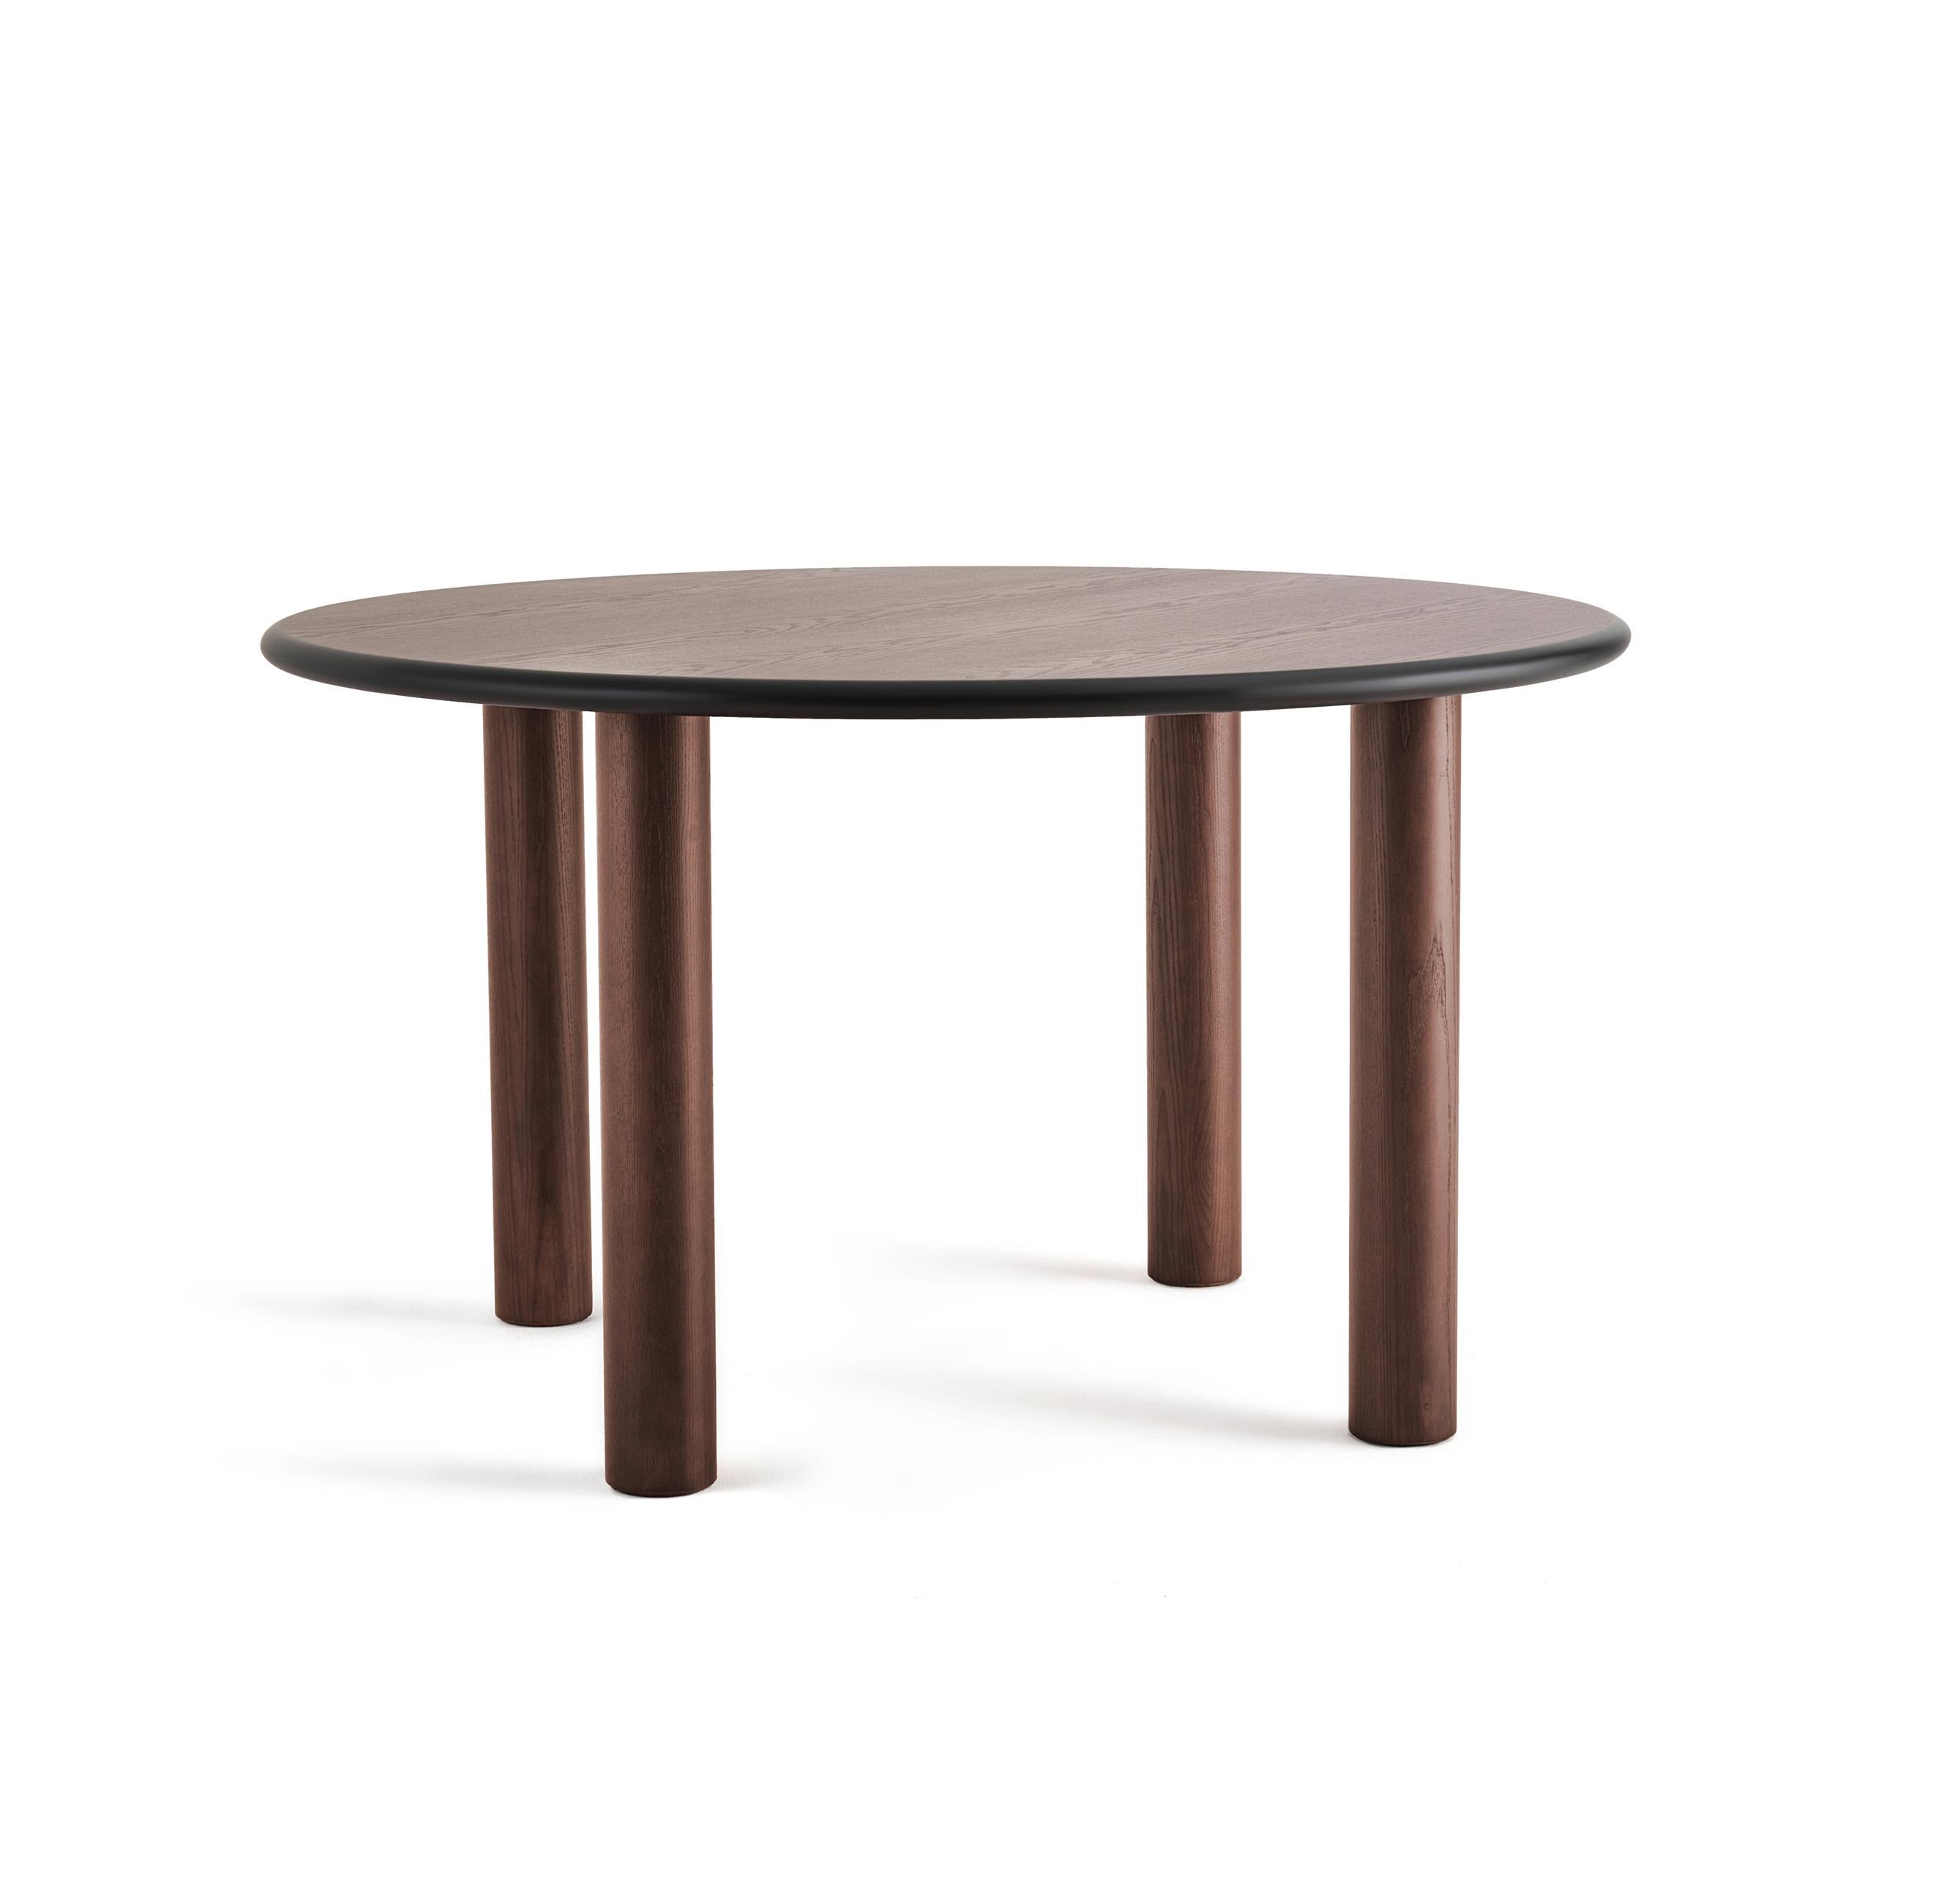 Ukrainian Contemporary Dining Round Table 'Paul' by Noom, Brown Stained, 180 cm For Sale